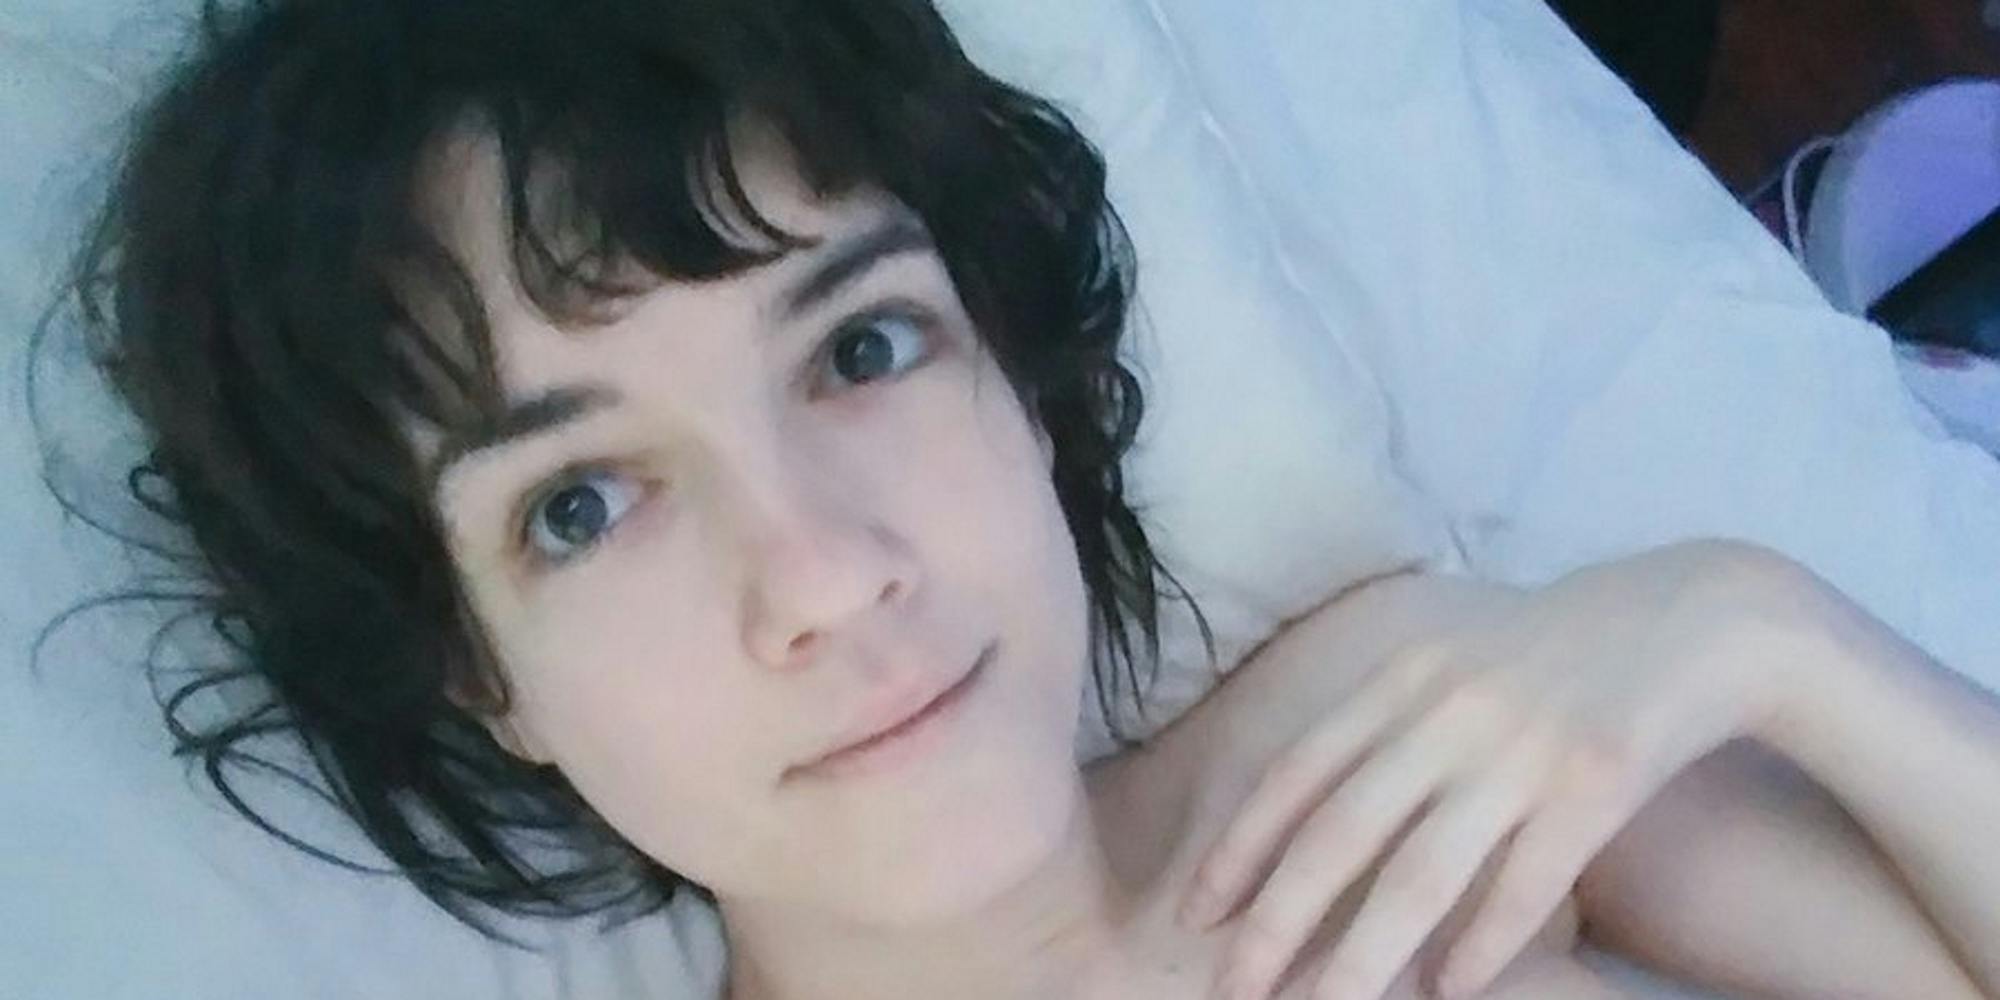 Trans Porn Star Earns Twitters Love For Her Big Announcement